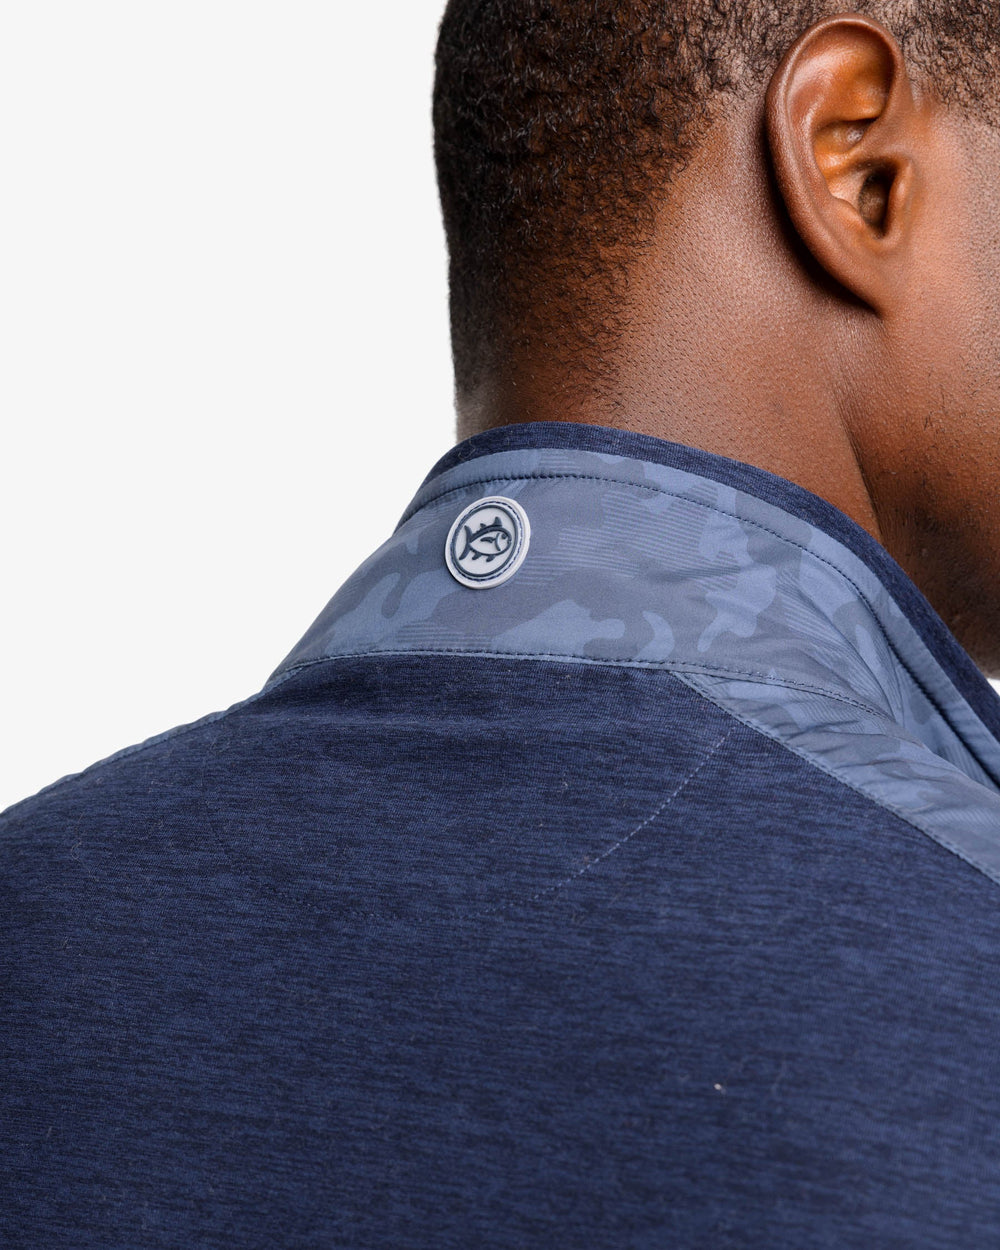 The back detail view of the Abercorn Camo Performance Vest by Southern Tide - True Navy